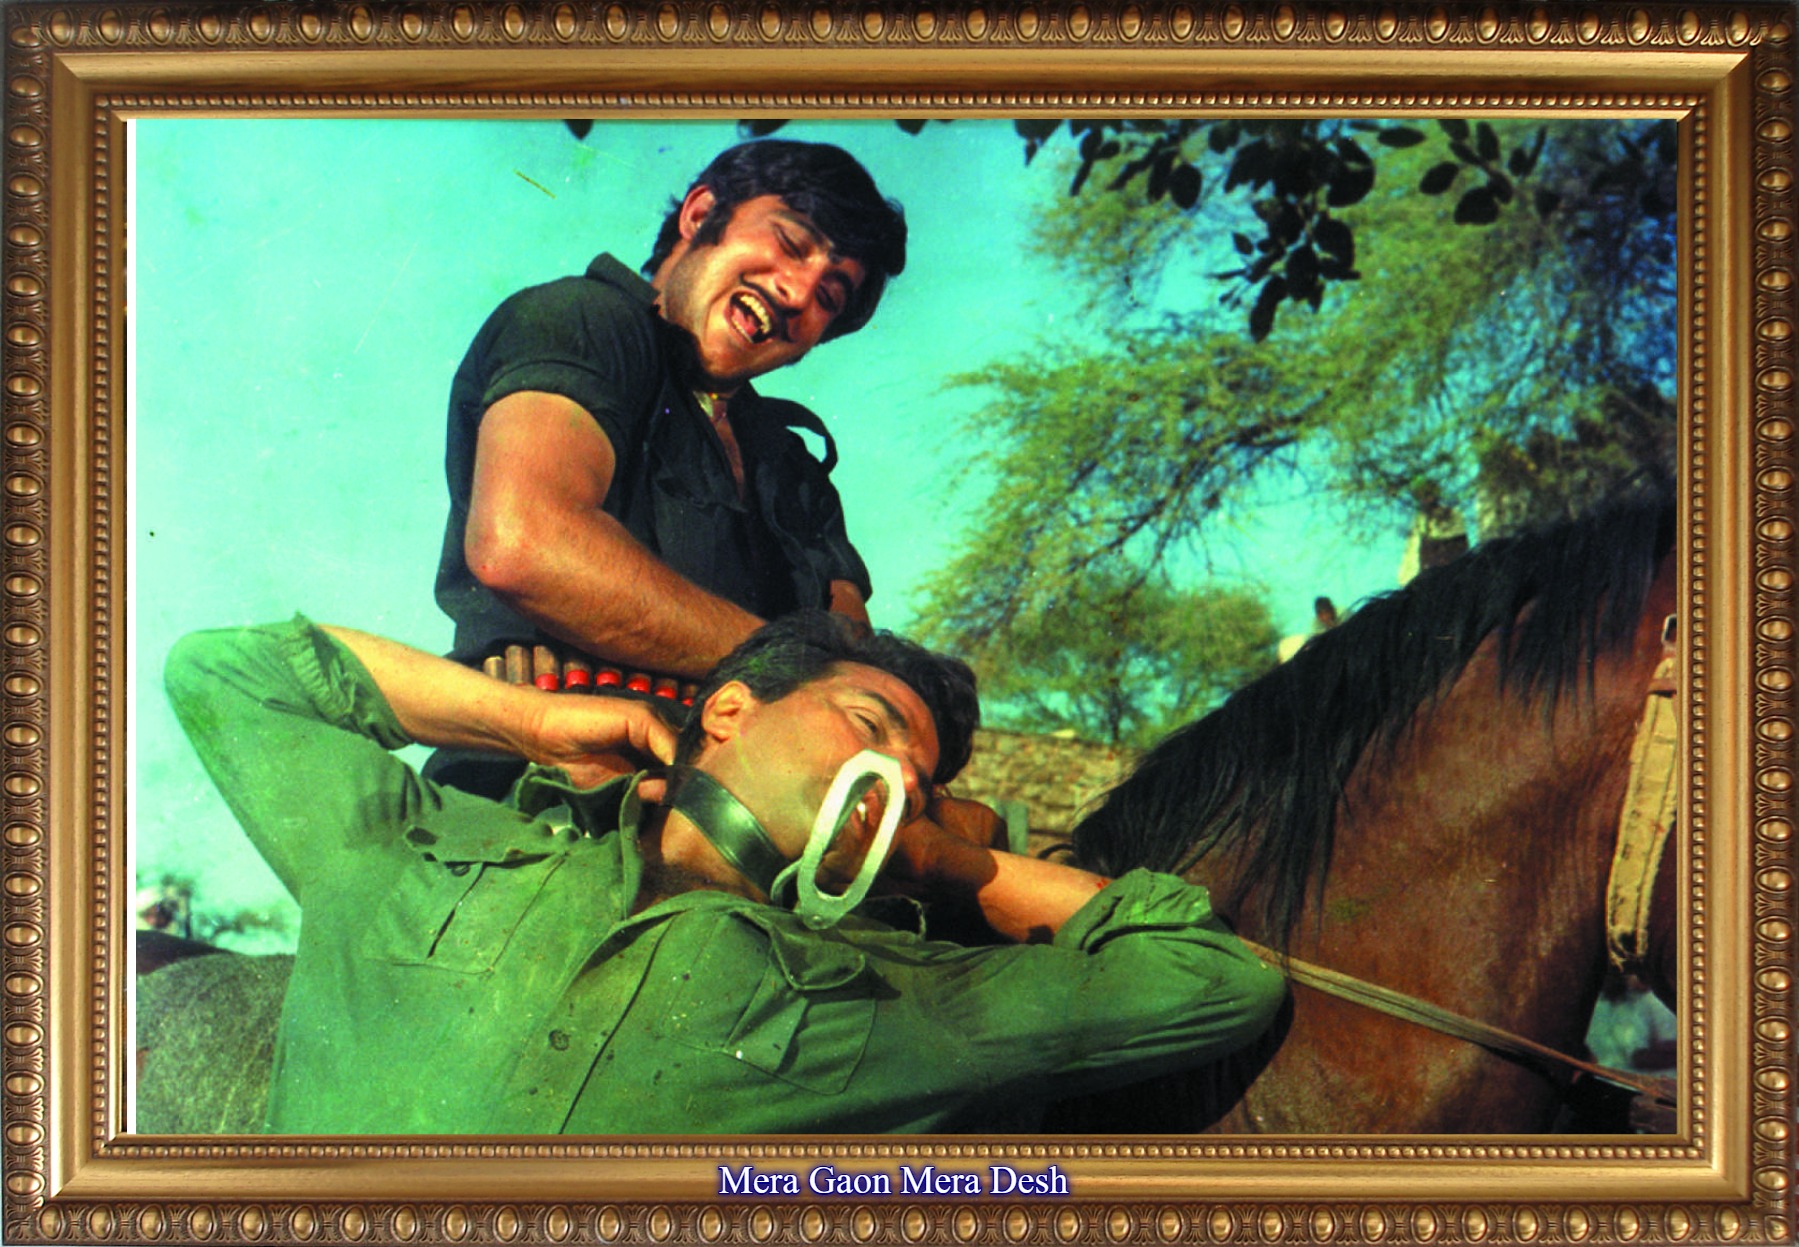 You are currently viewing “Vinod Khanna Continued to Enjoy His ‘Macho’ Image”